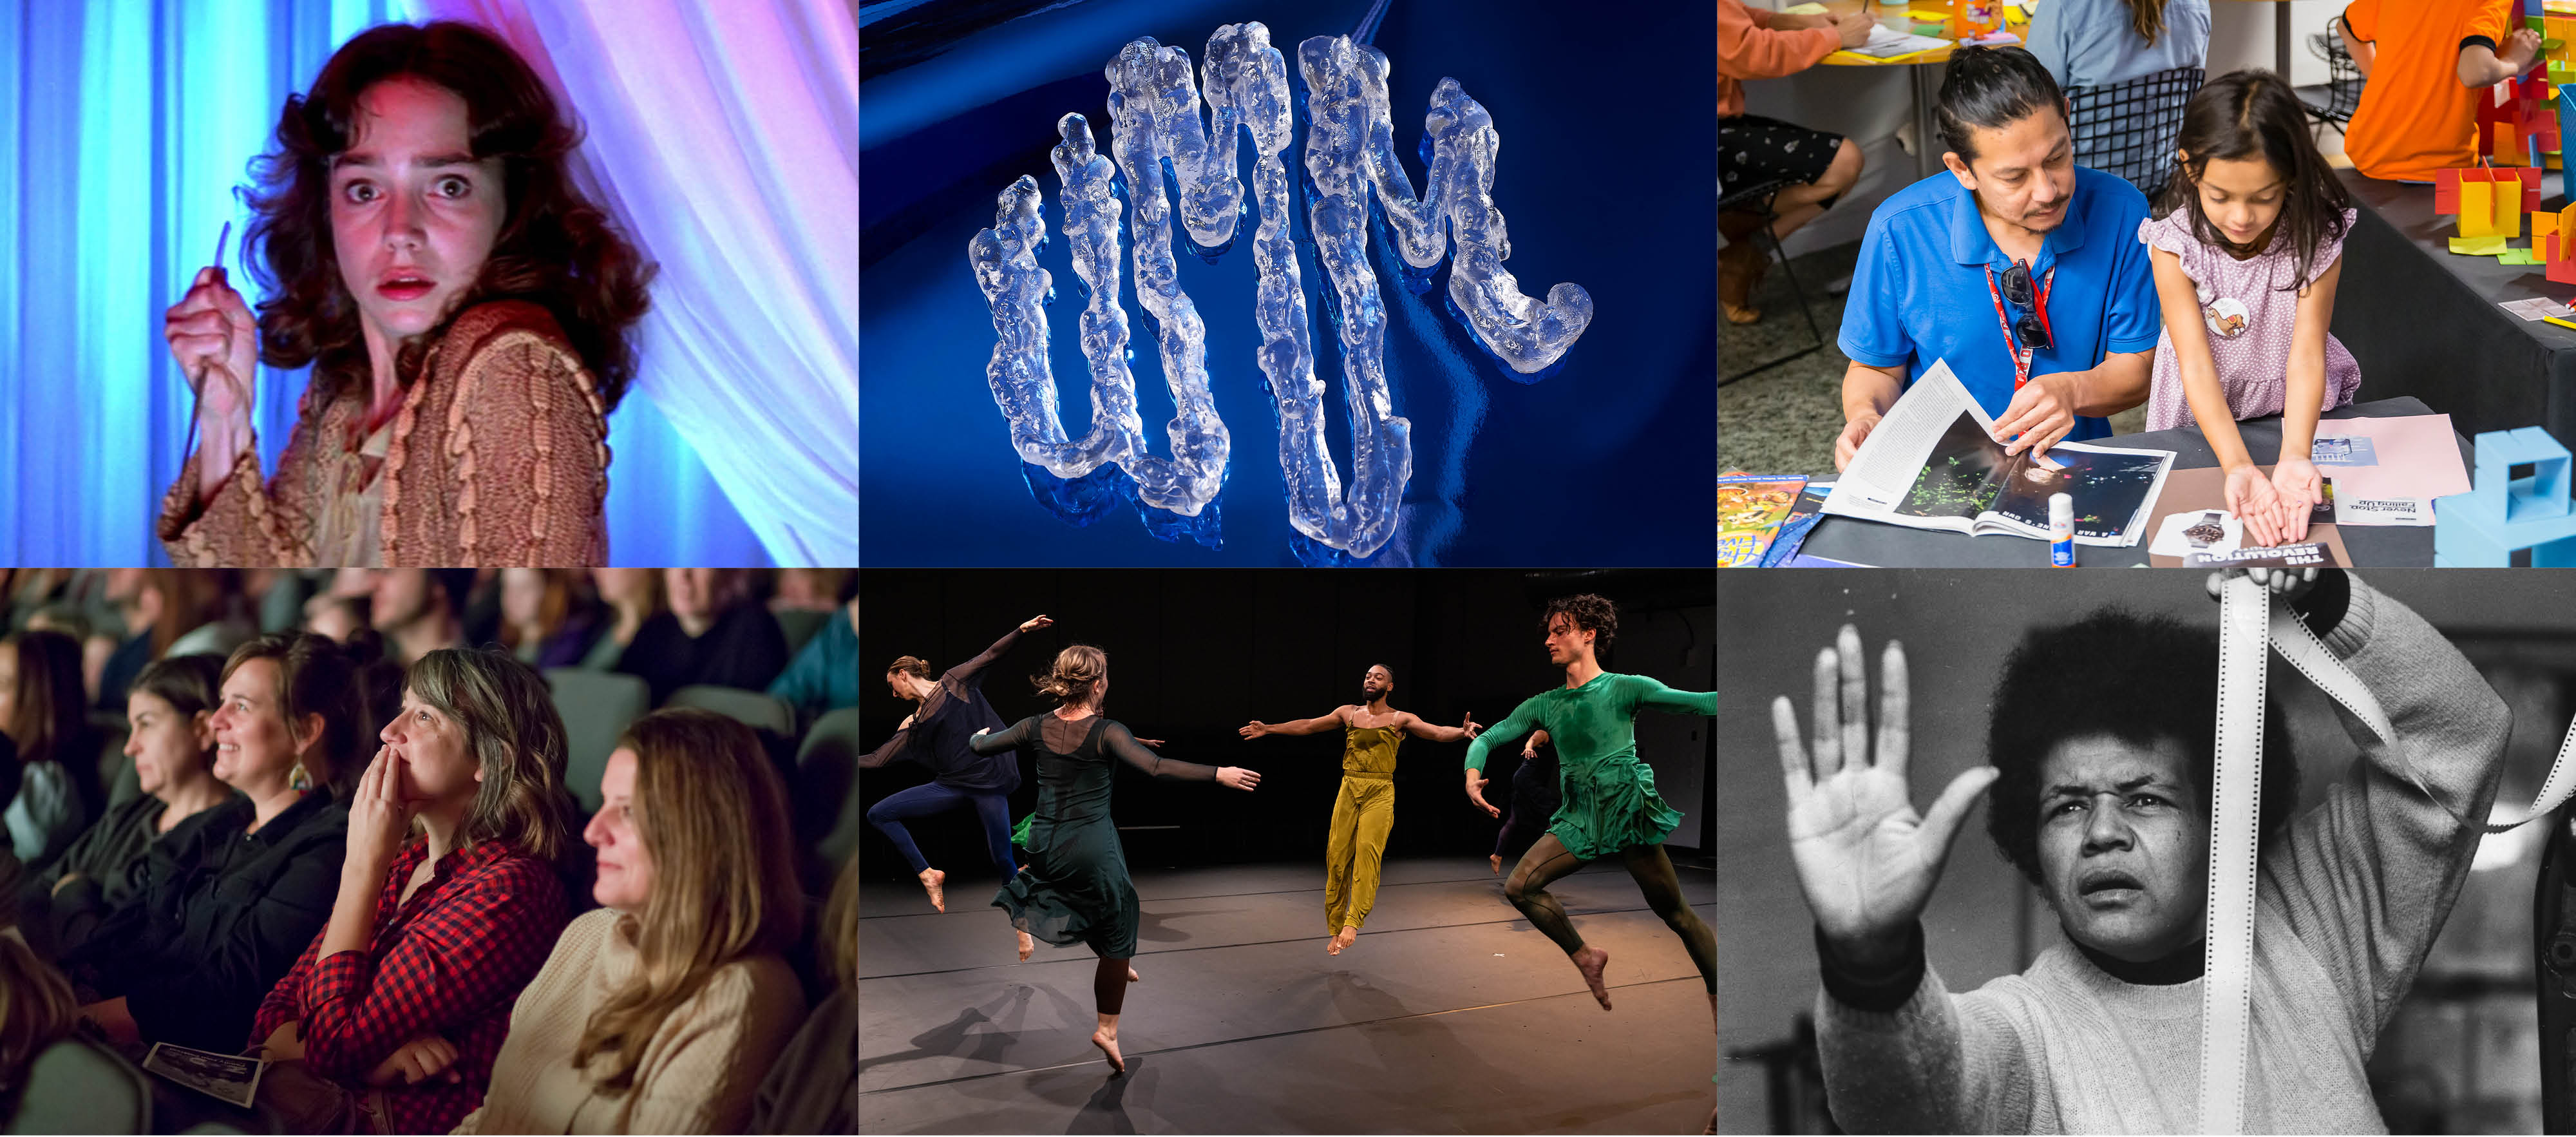 A collage of six images reflecting a range of events coming to the Wexner Center for the Arts in 2023 and 2024